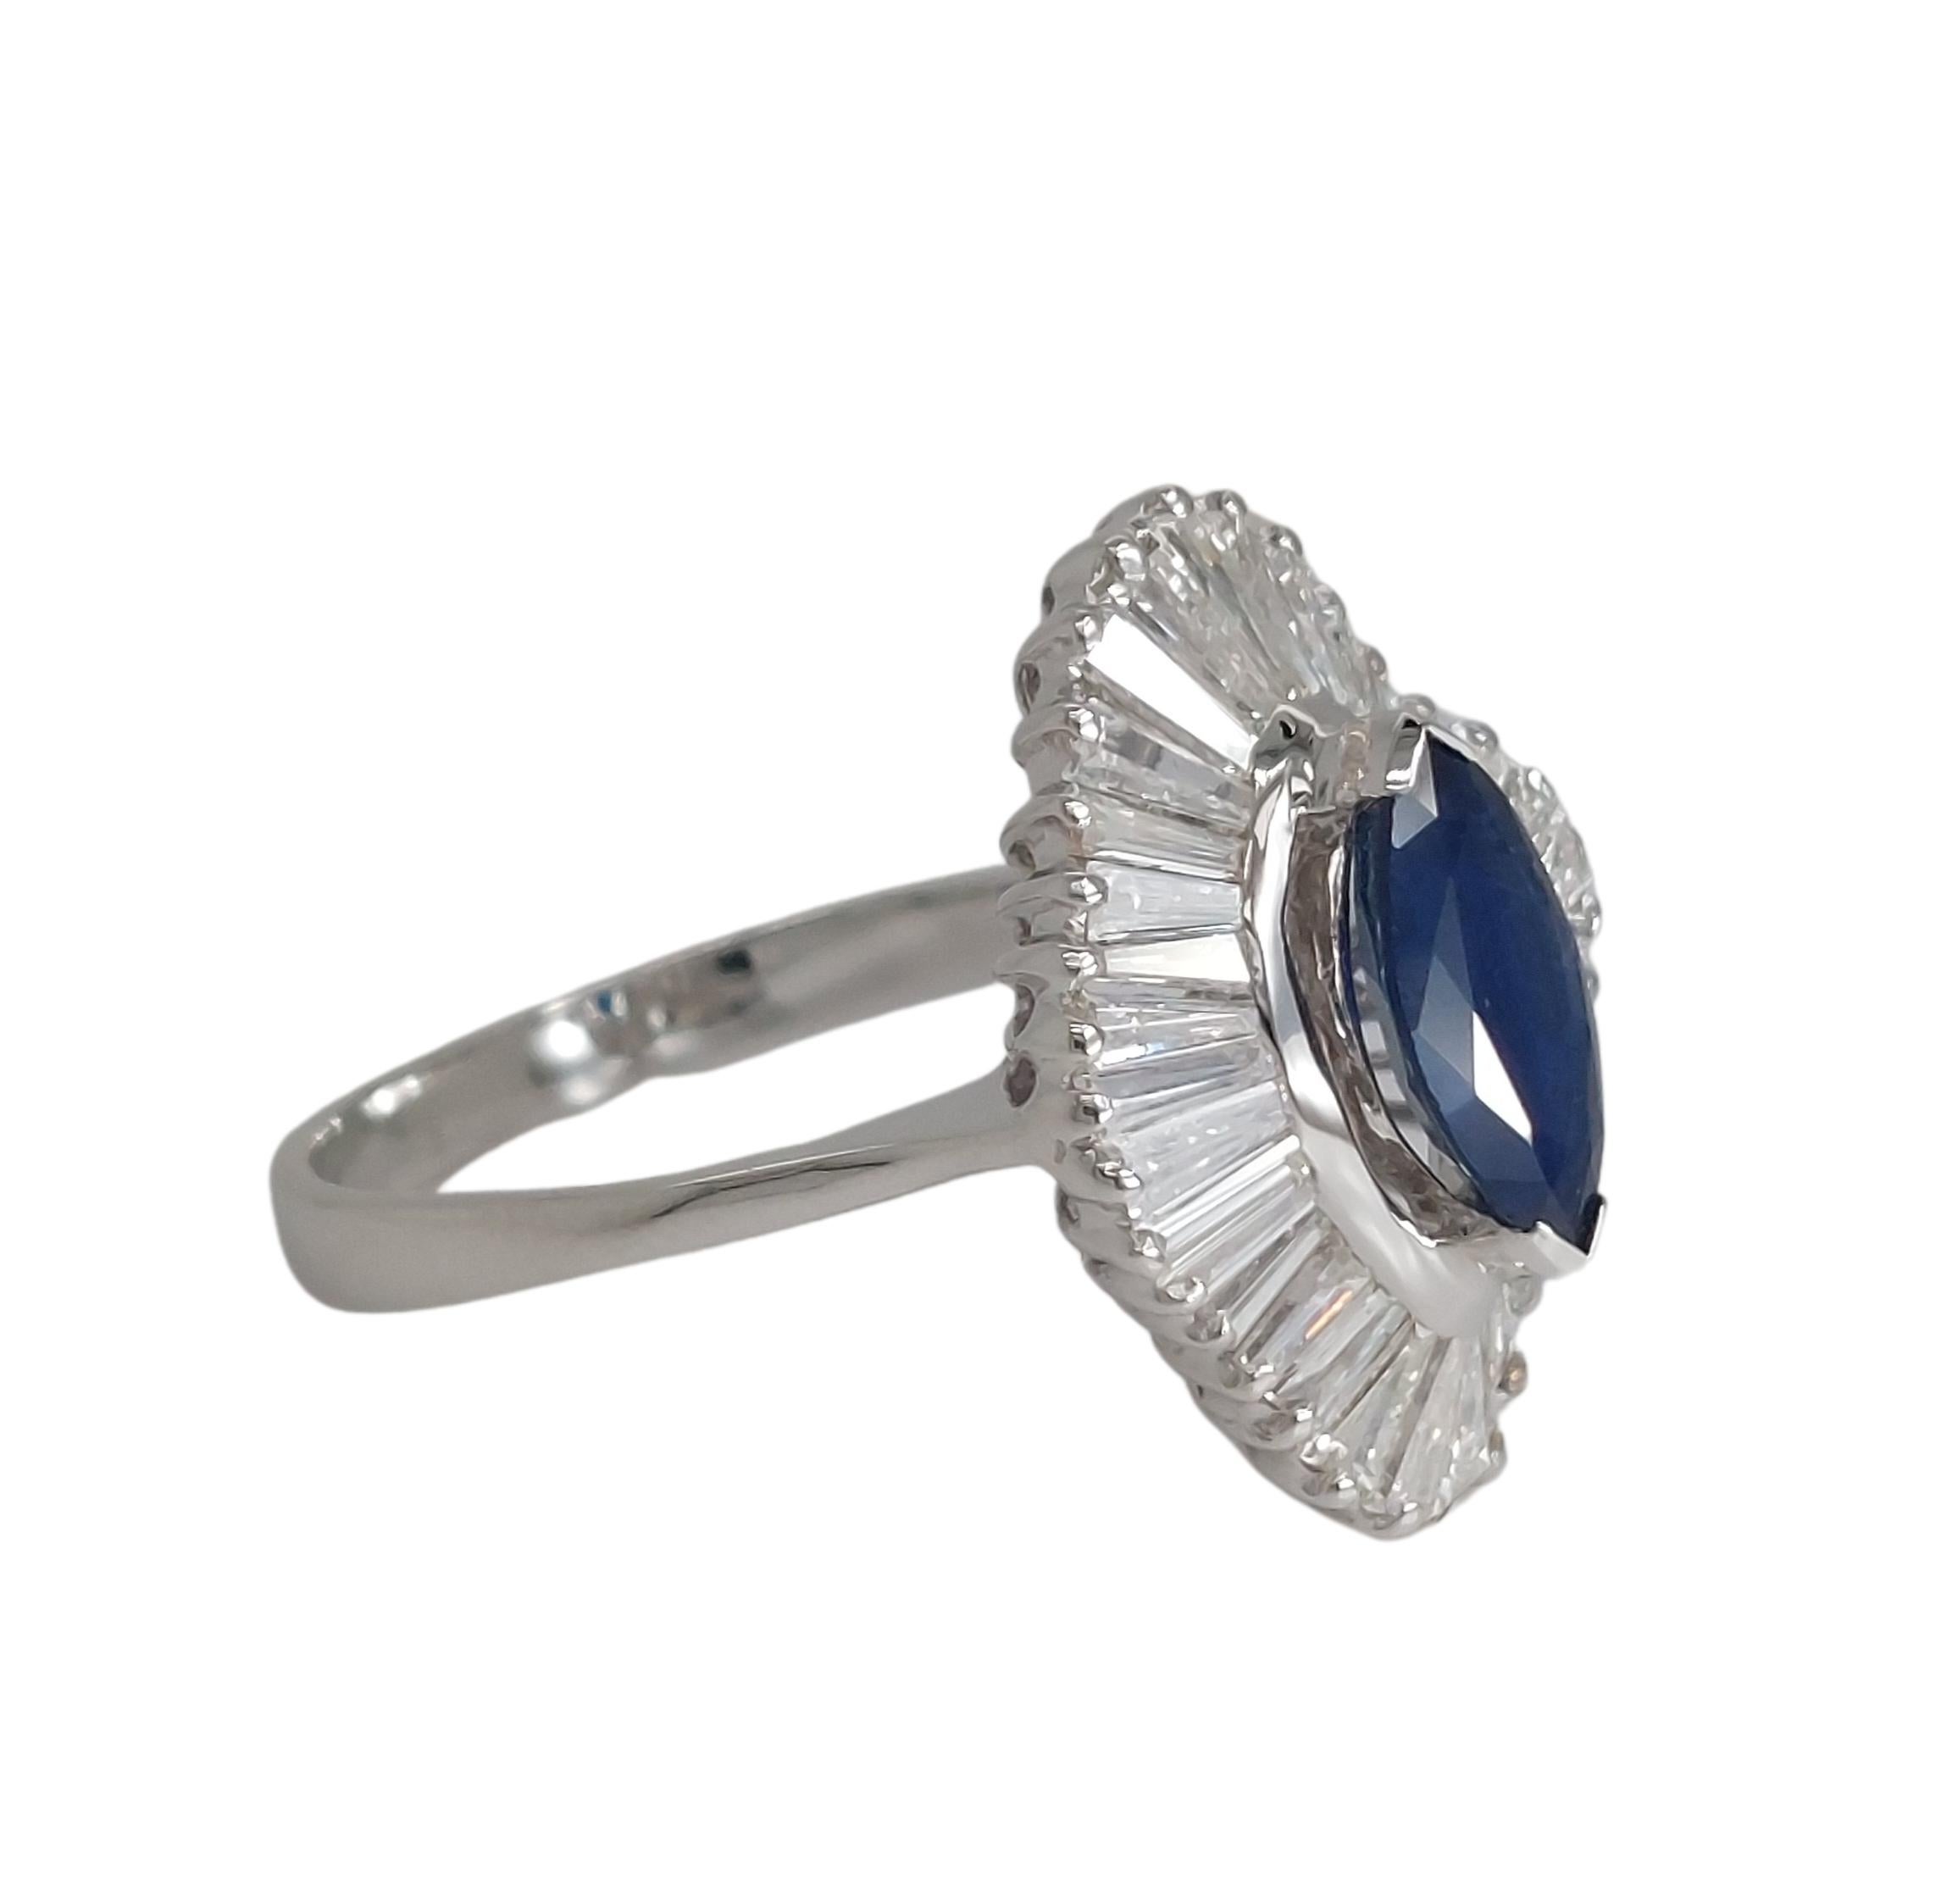 18kt White Gold Ring with 1.02ct Marquise Cut Sapphire and 2.4ct Diamonds For Sale 1